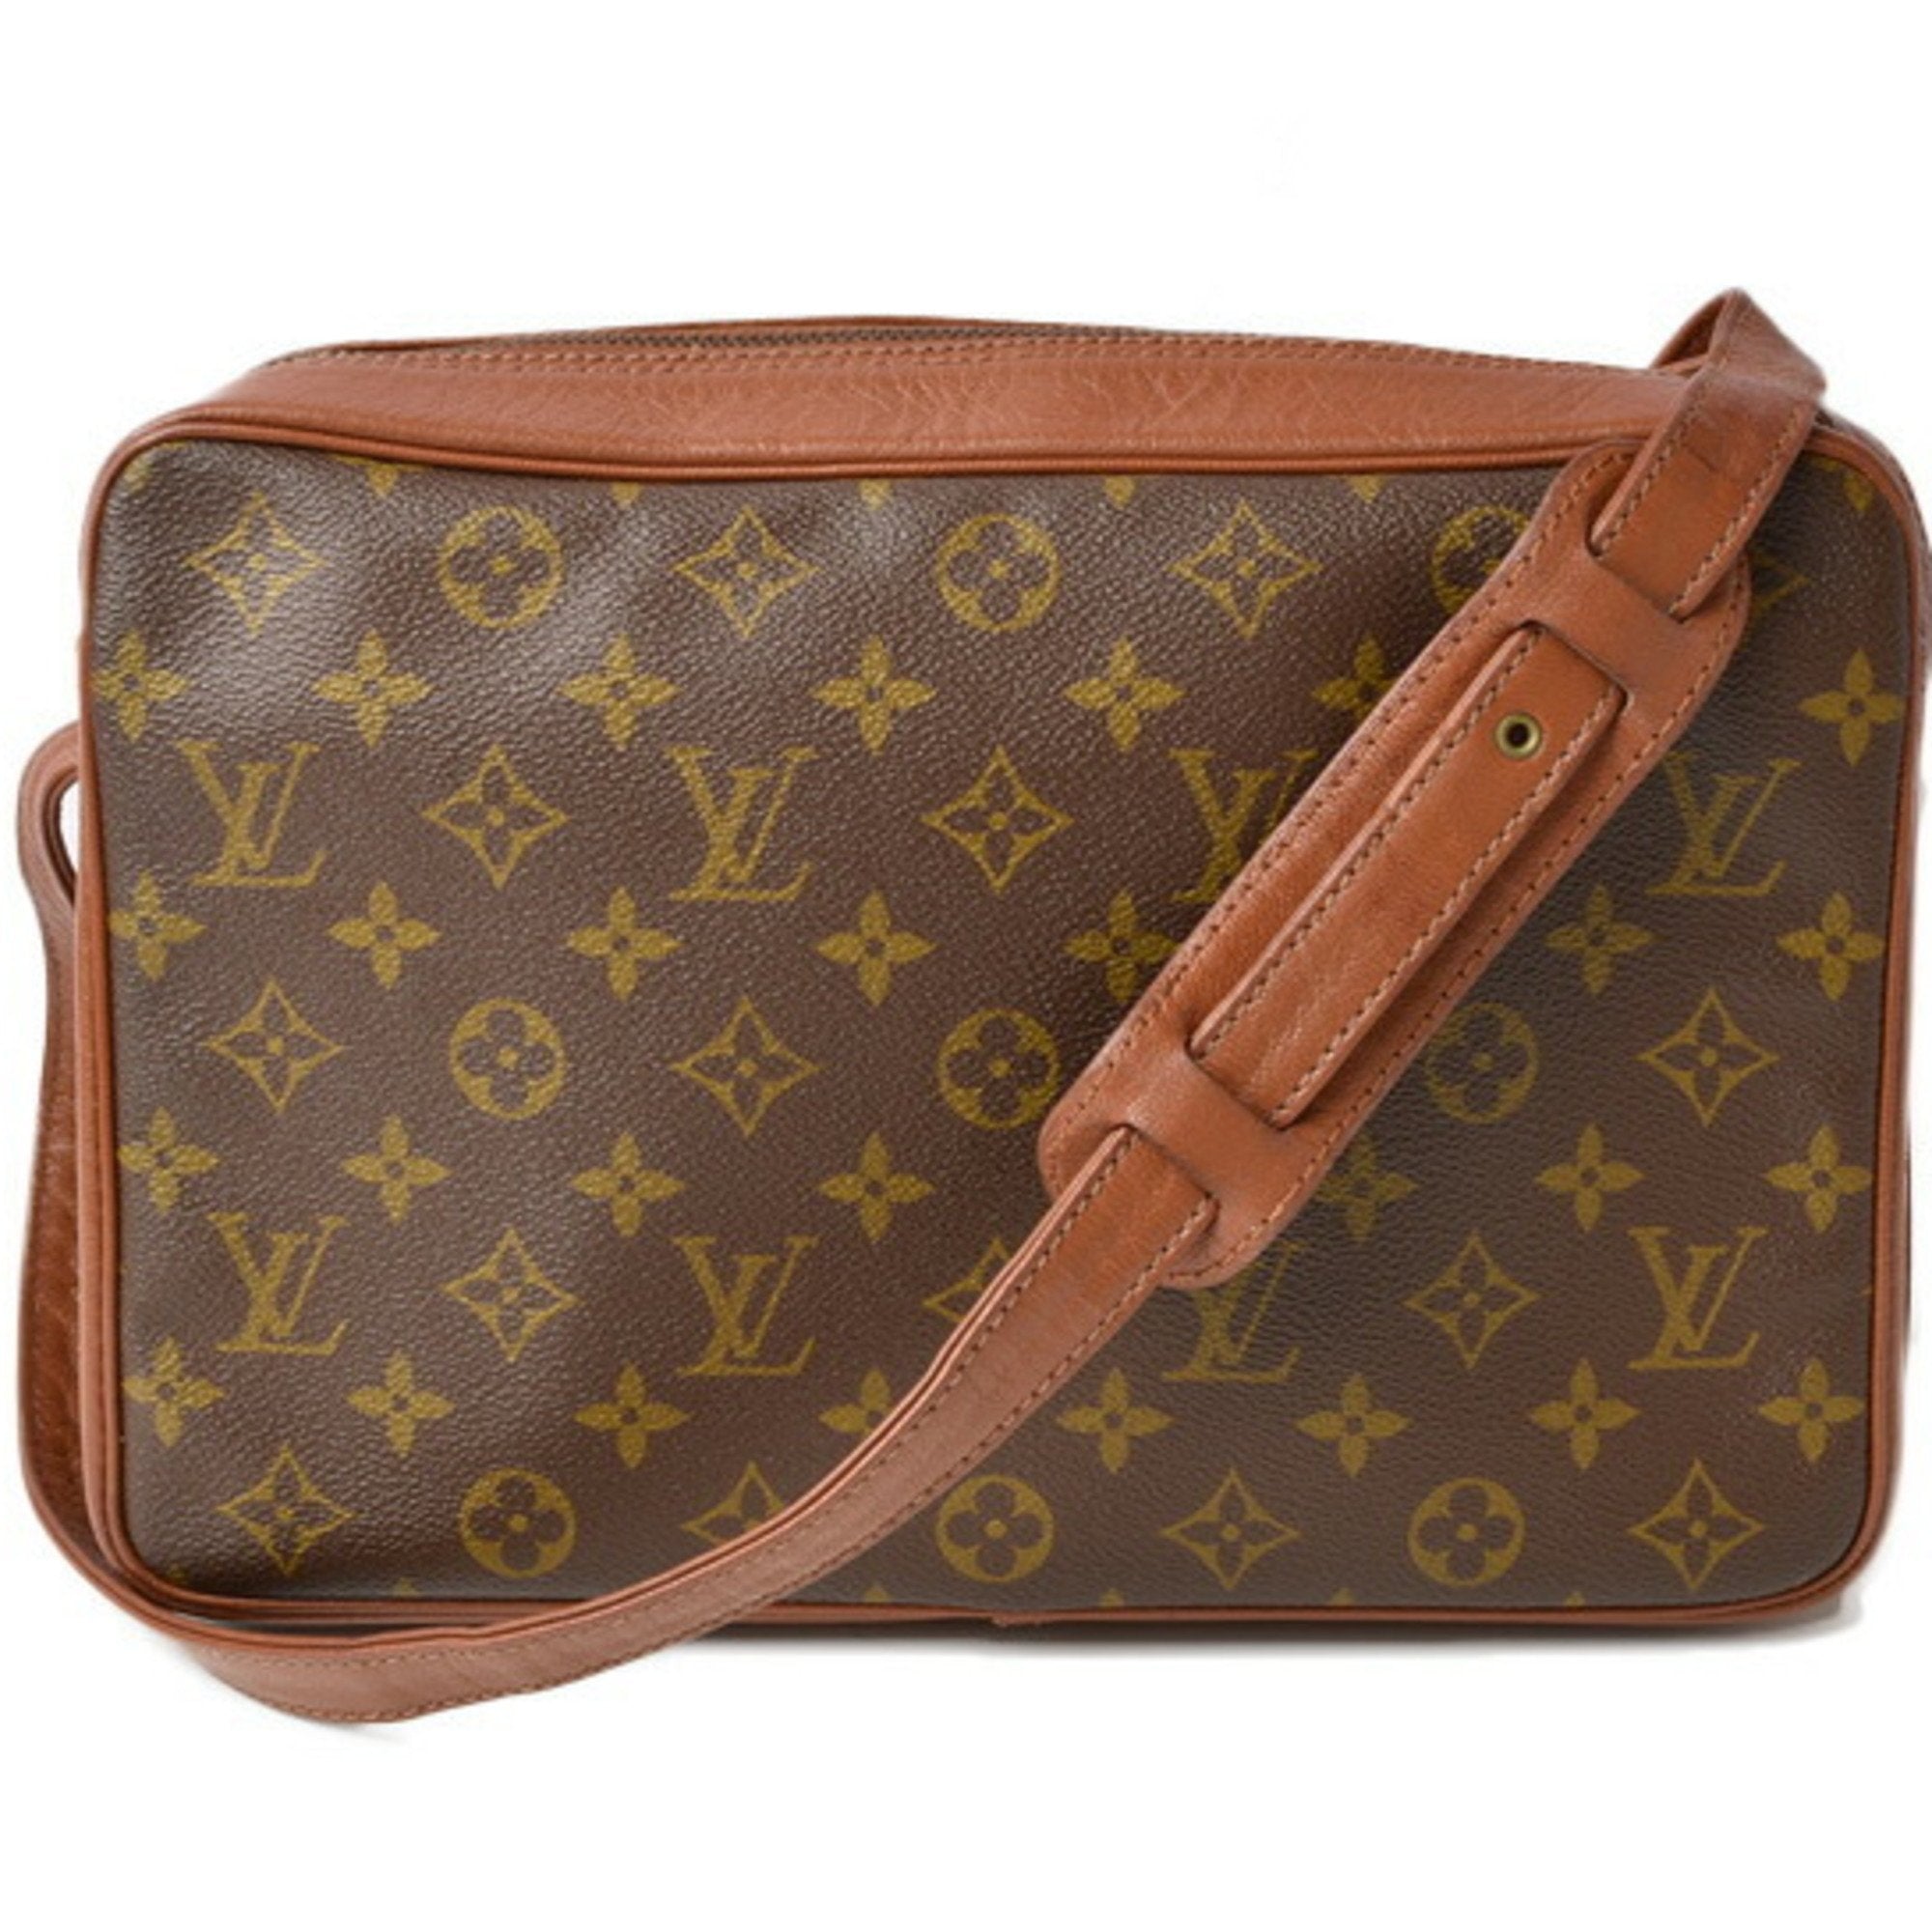 Louis Vuitton Vintage French Company Monogram Canvas Sac Bandouliere 3   Consigned Designs